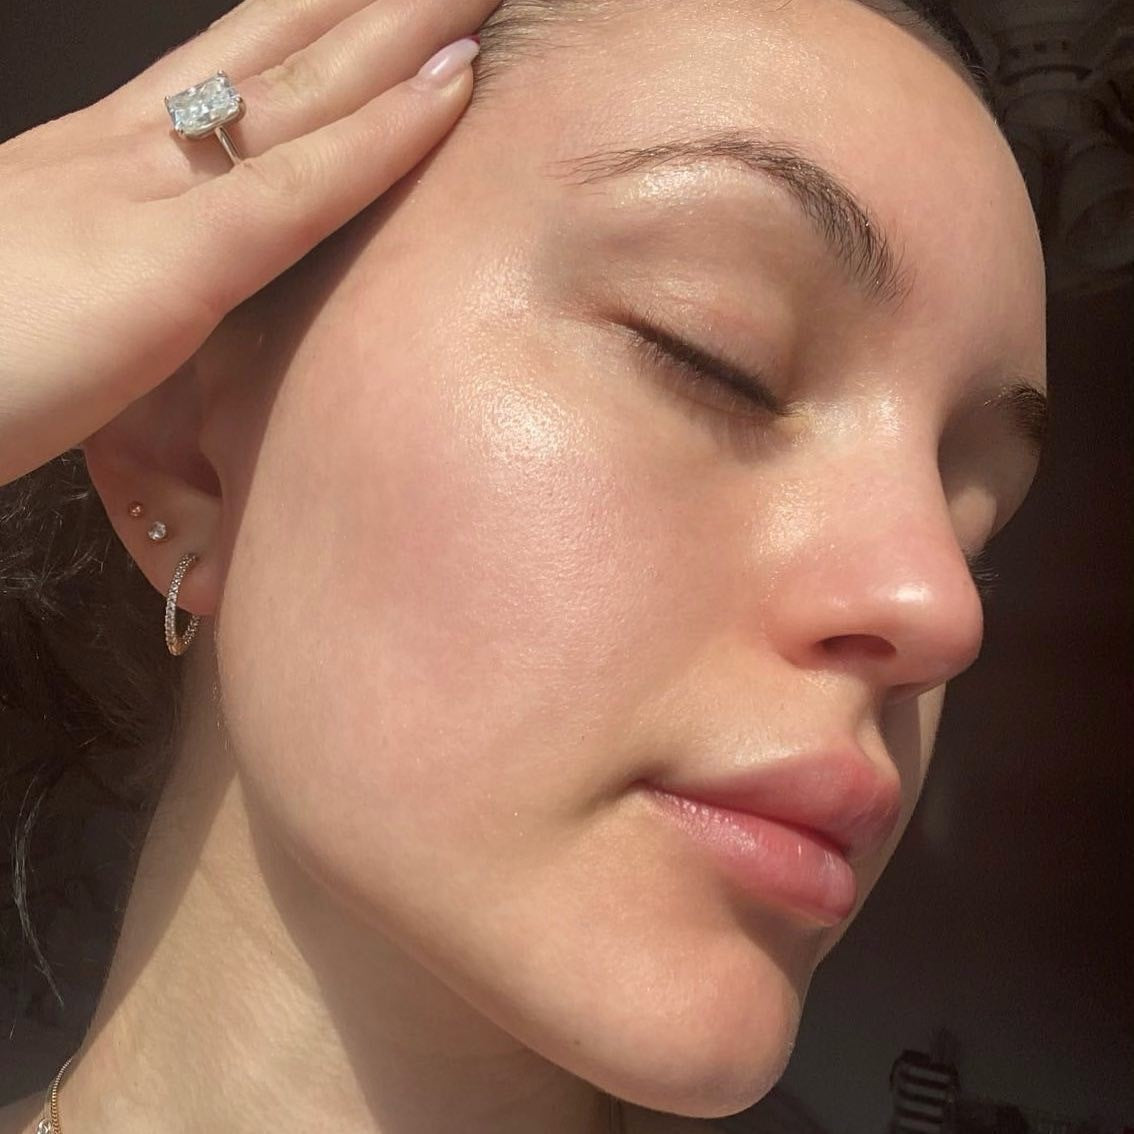 Mimi showing her glowing skin after using Iremia Skincare's Soothing Lotion and Restorative Facial Oil for sensitive skin.